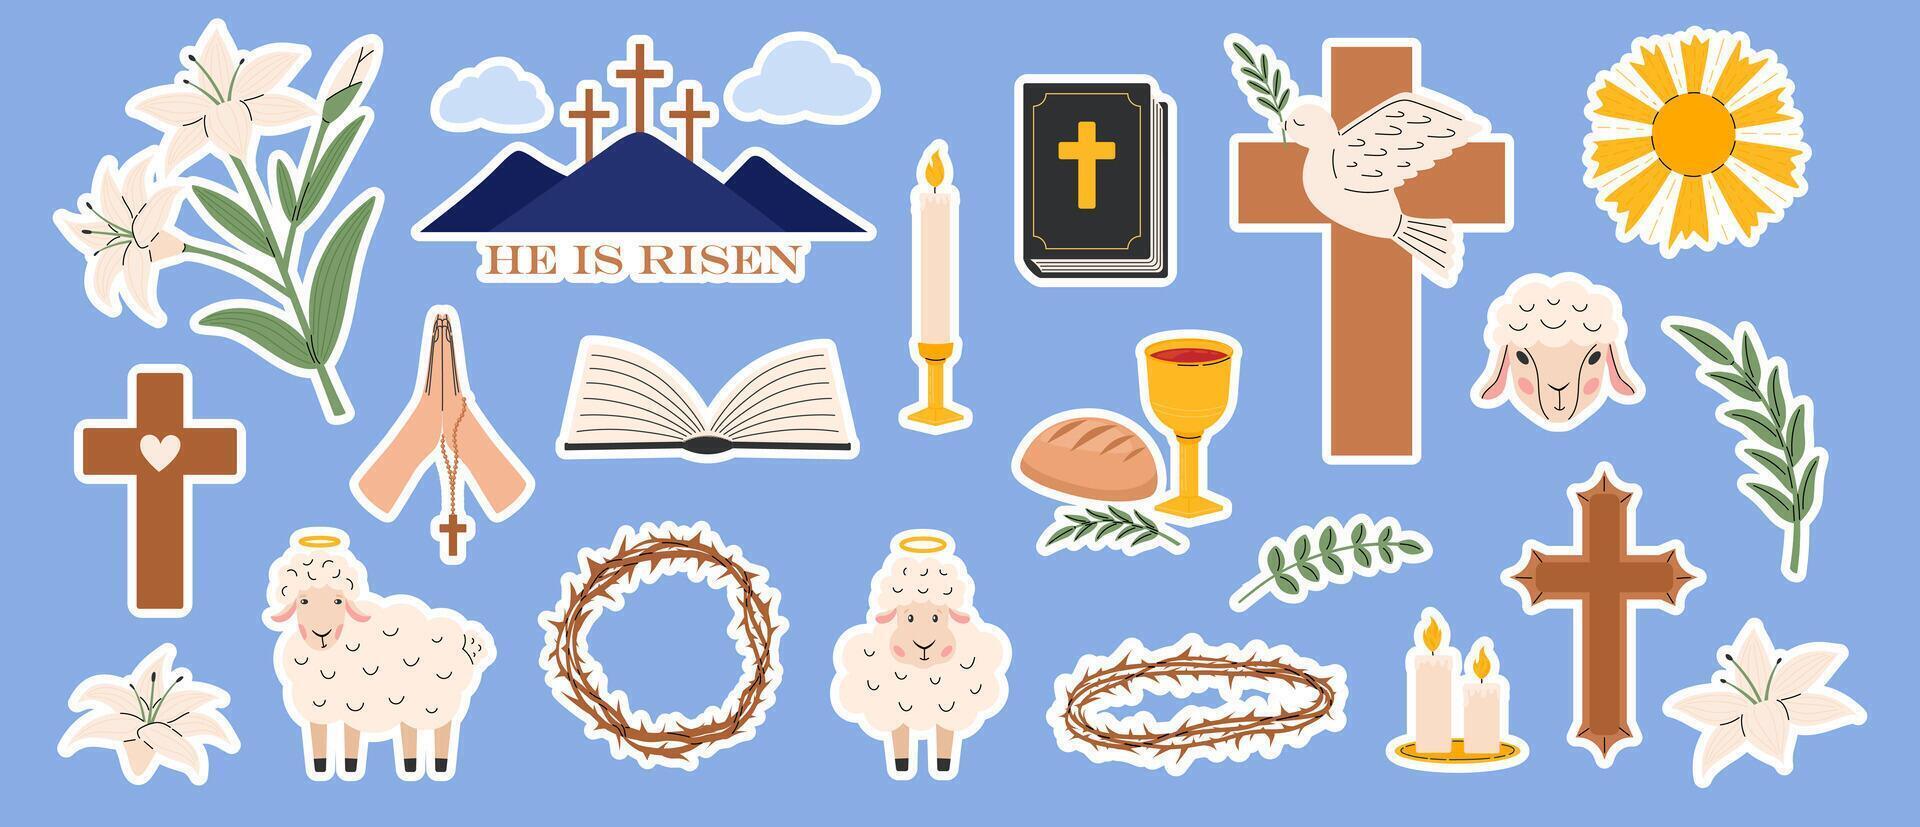 Easter sticker pack. Religious christian signs and symbols. Bible, hands holding cross, dove with branch, cross of Jesus Christ, crown of thorns, bowl and bread, sheep. Holy Week. Vector illustration